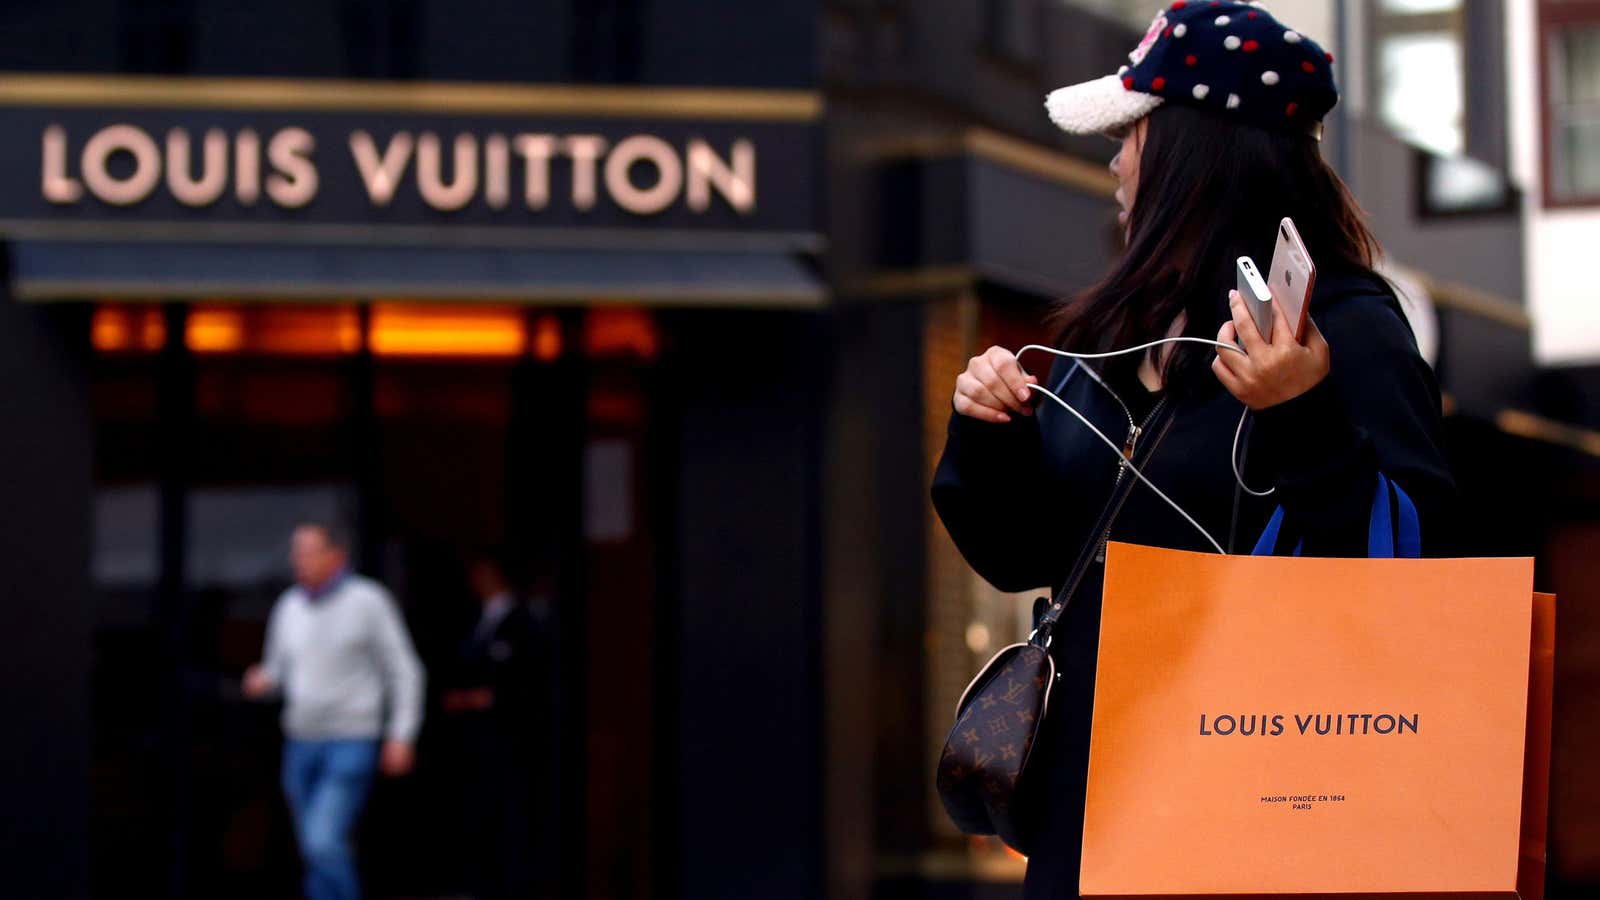 A male customer uses a smartphone next to a Louis Vuitton shopping